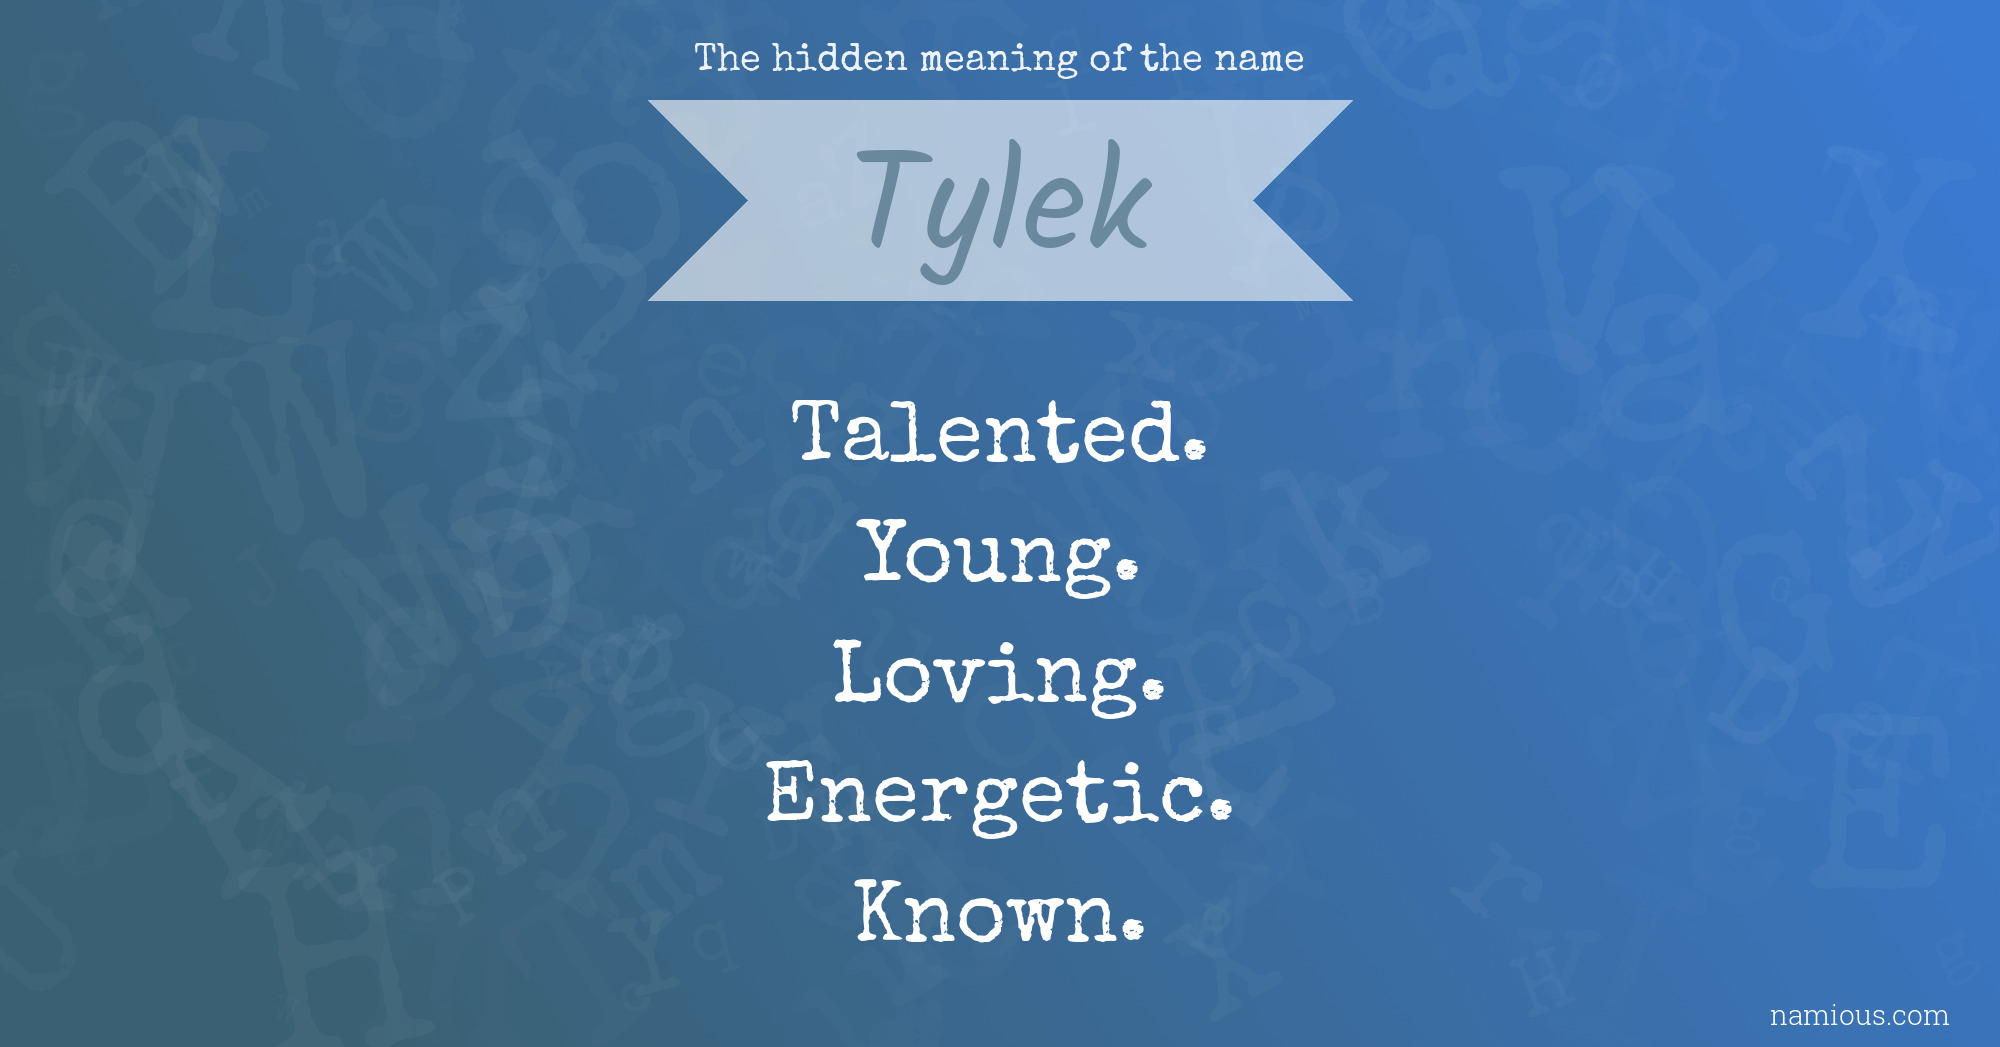 The hidden meaning of the name Tylek